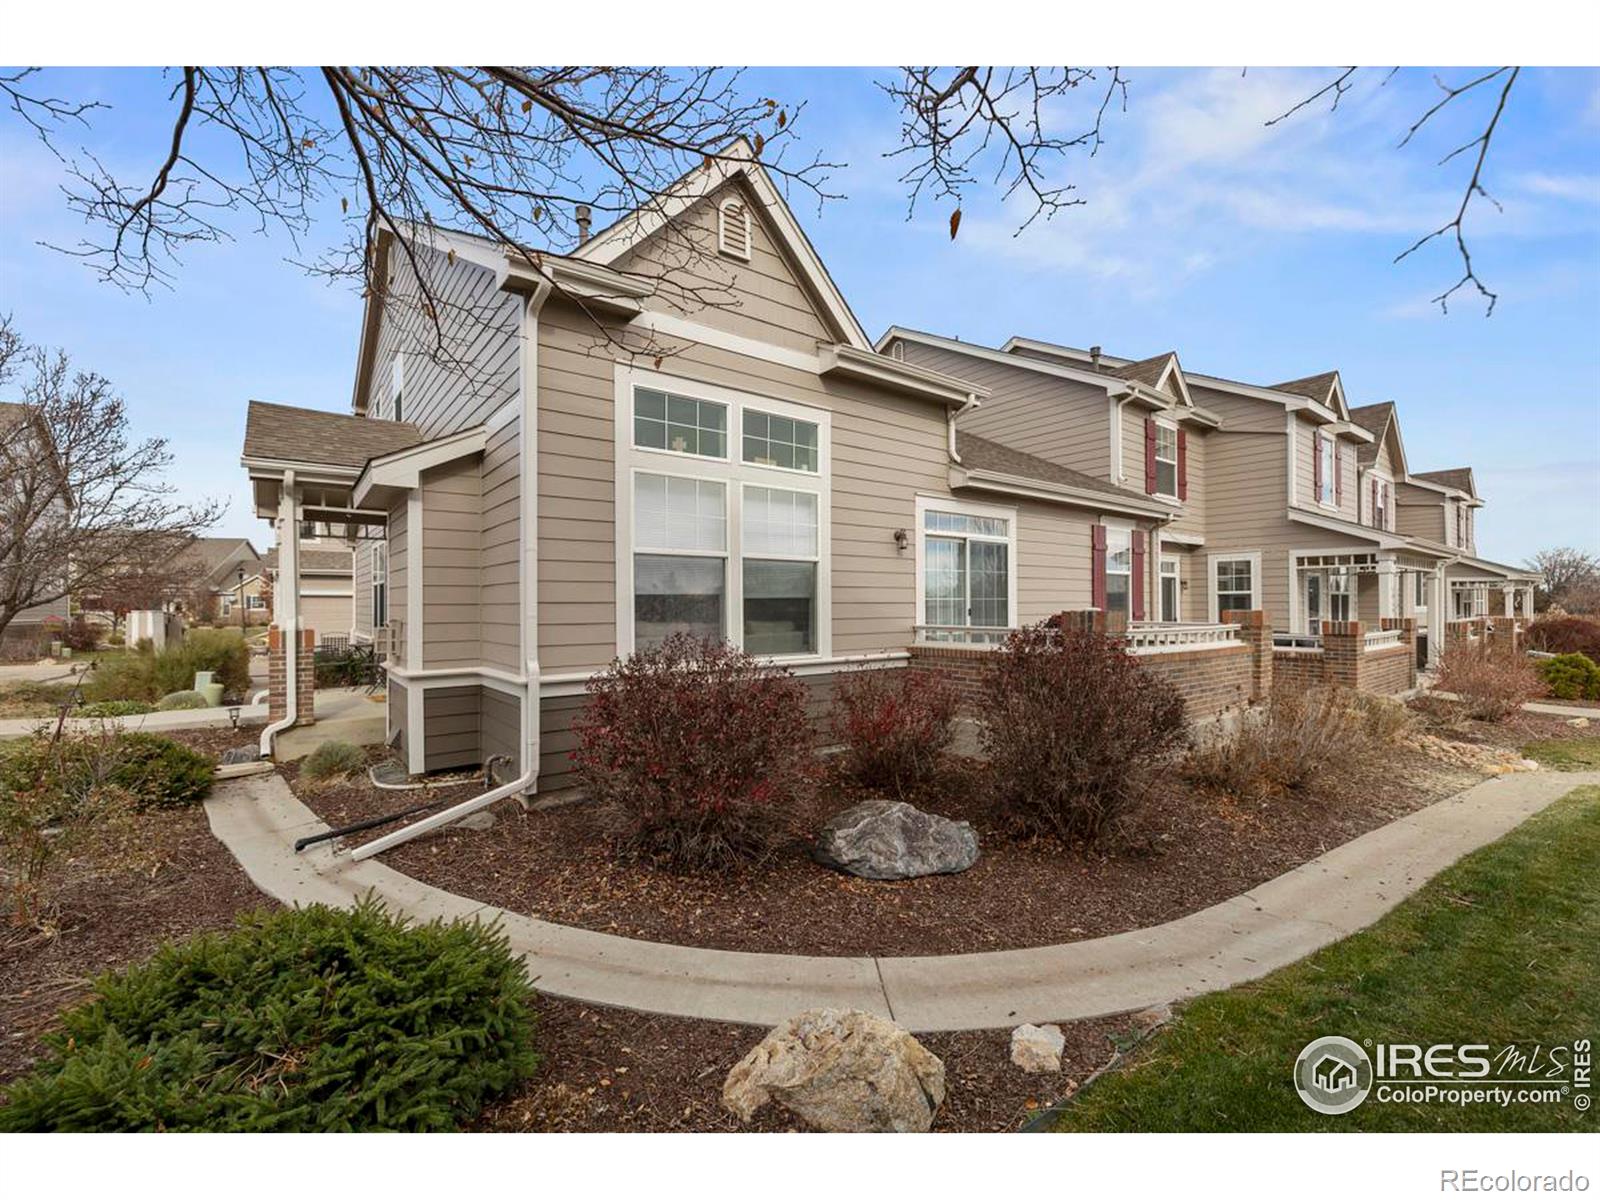 3080  champion circle, Loveland sold home. Closed on 2024-02-15 for $440,000.